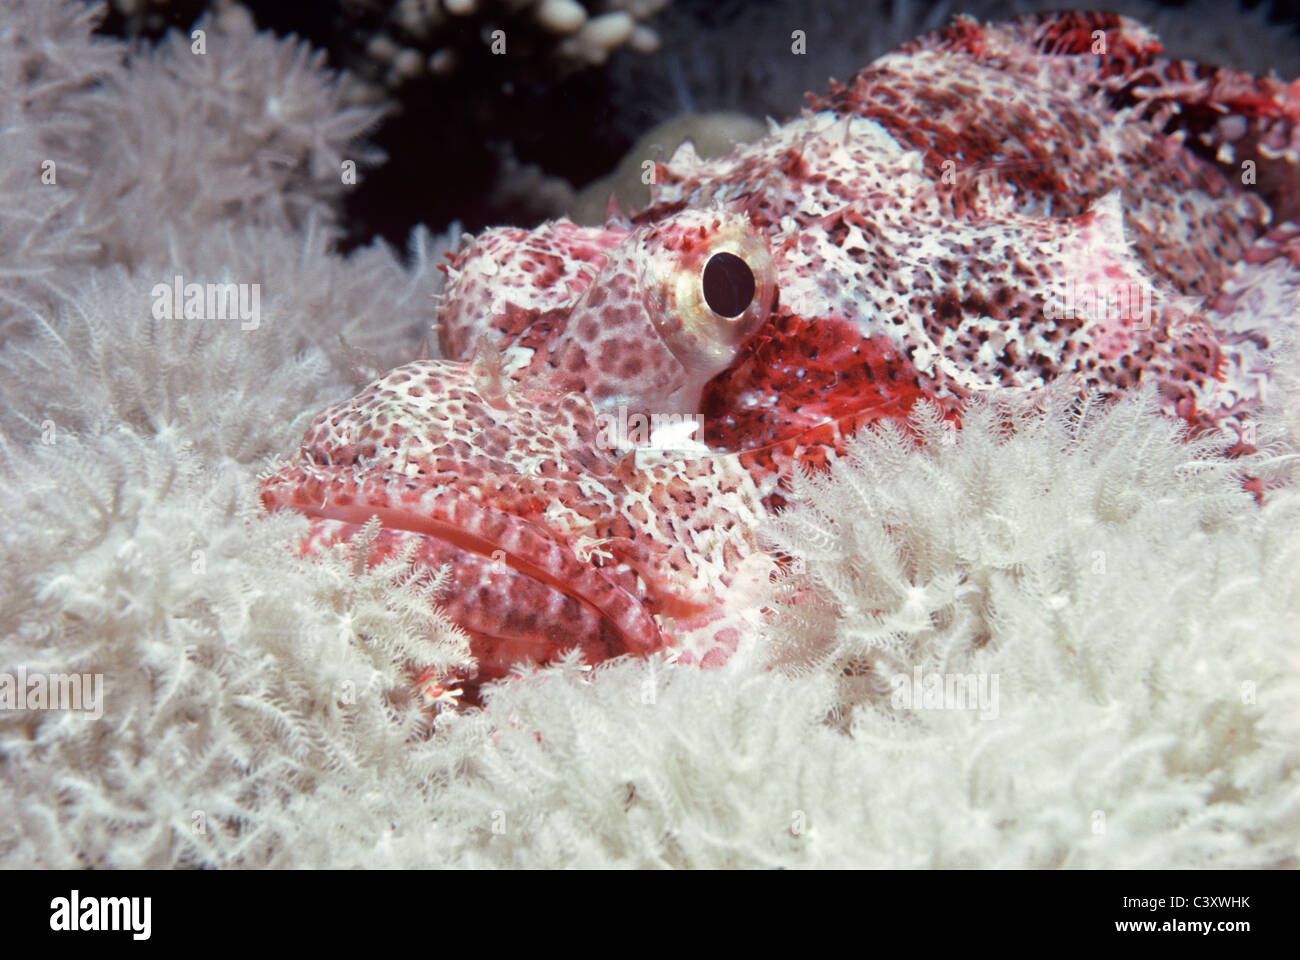 Tassled Scorpionfish (Scorpaneopsis oxcephalus) camouflaged amongst soft corals. Egypt - Red Sea Stock Photo